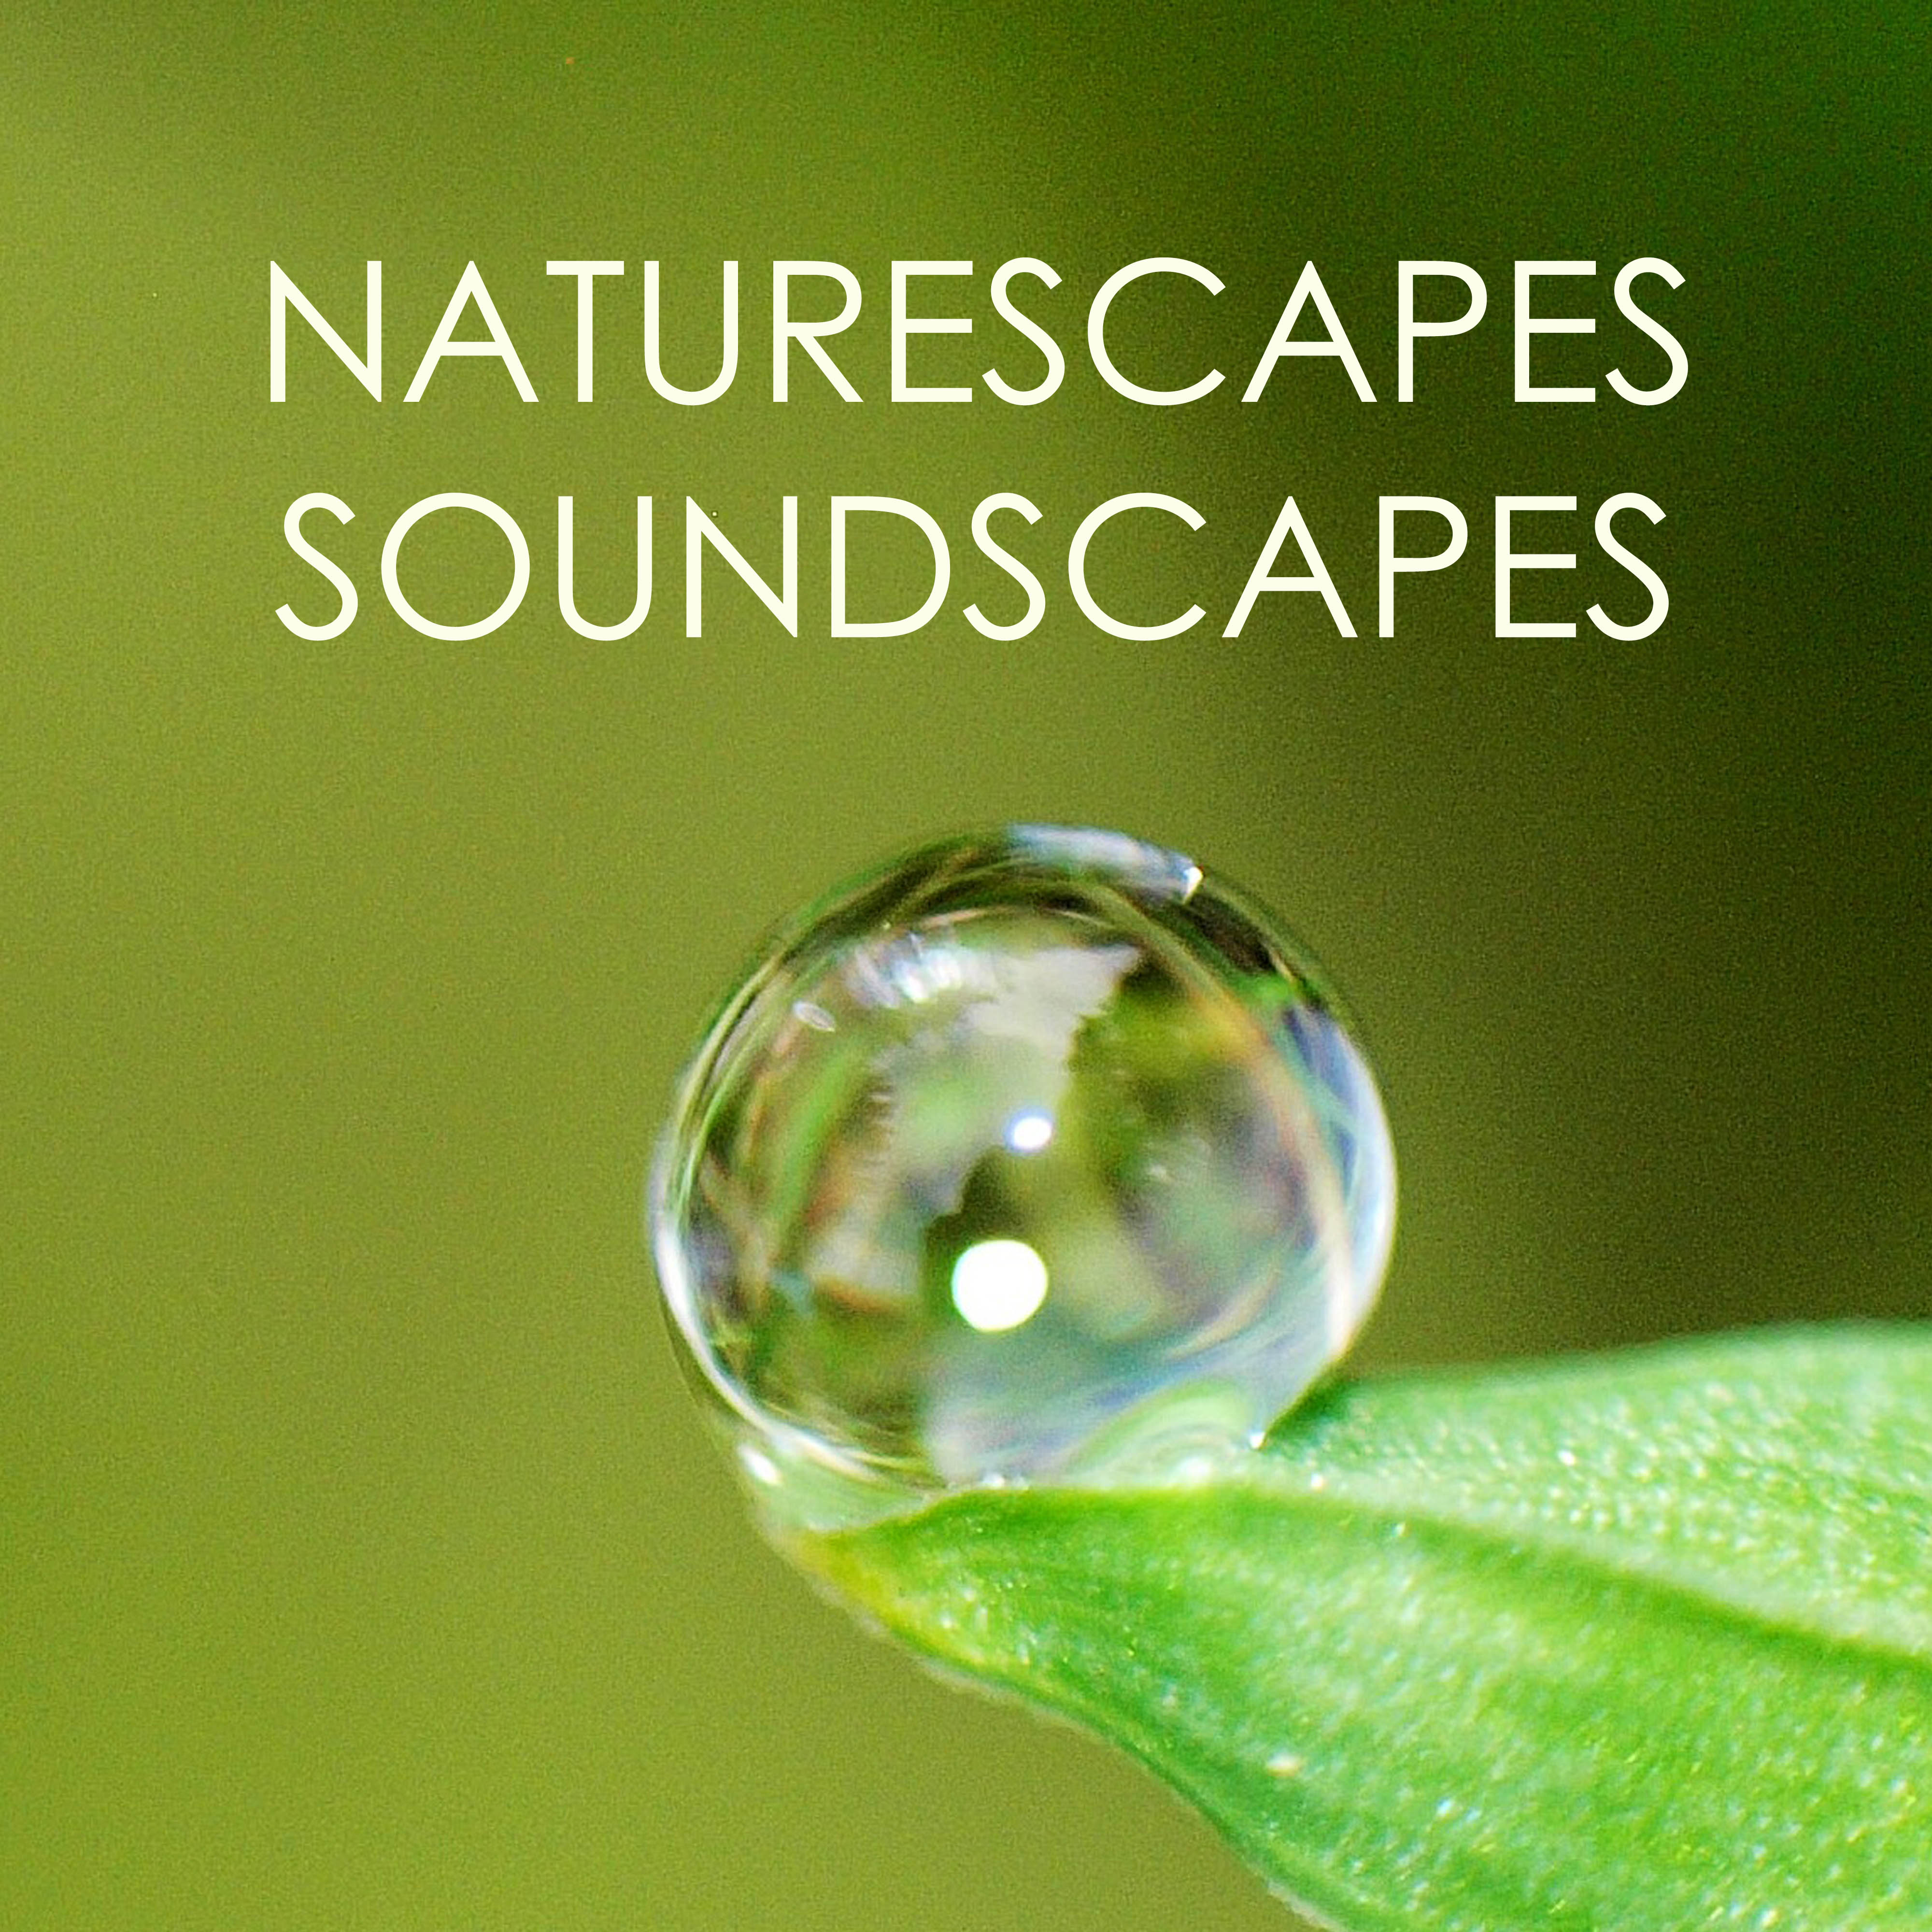 Newborn World - Natural Sounds of the Sea